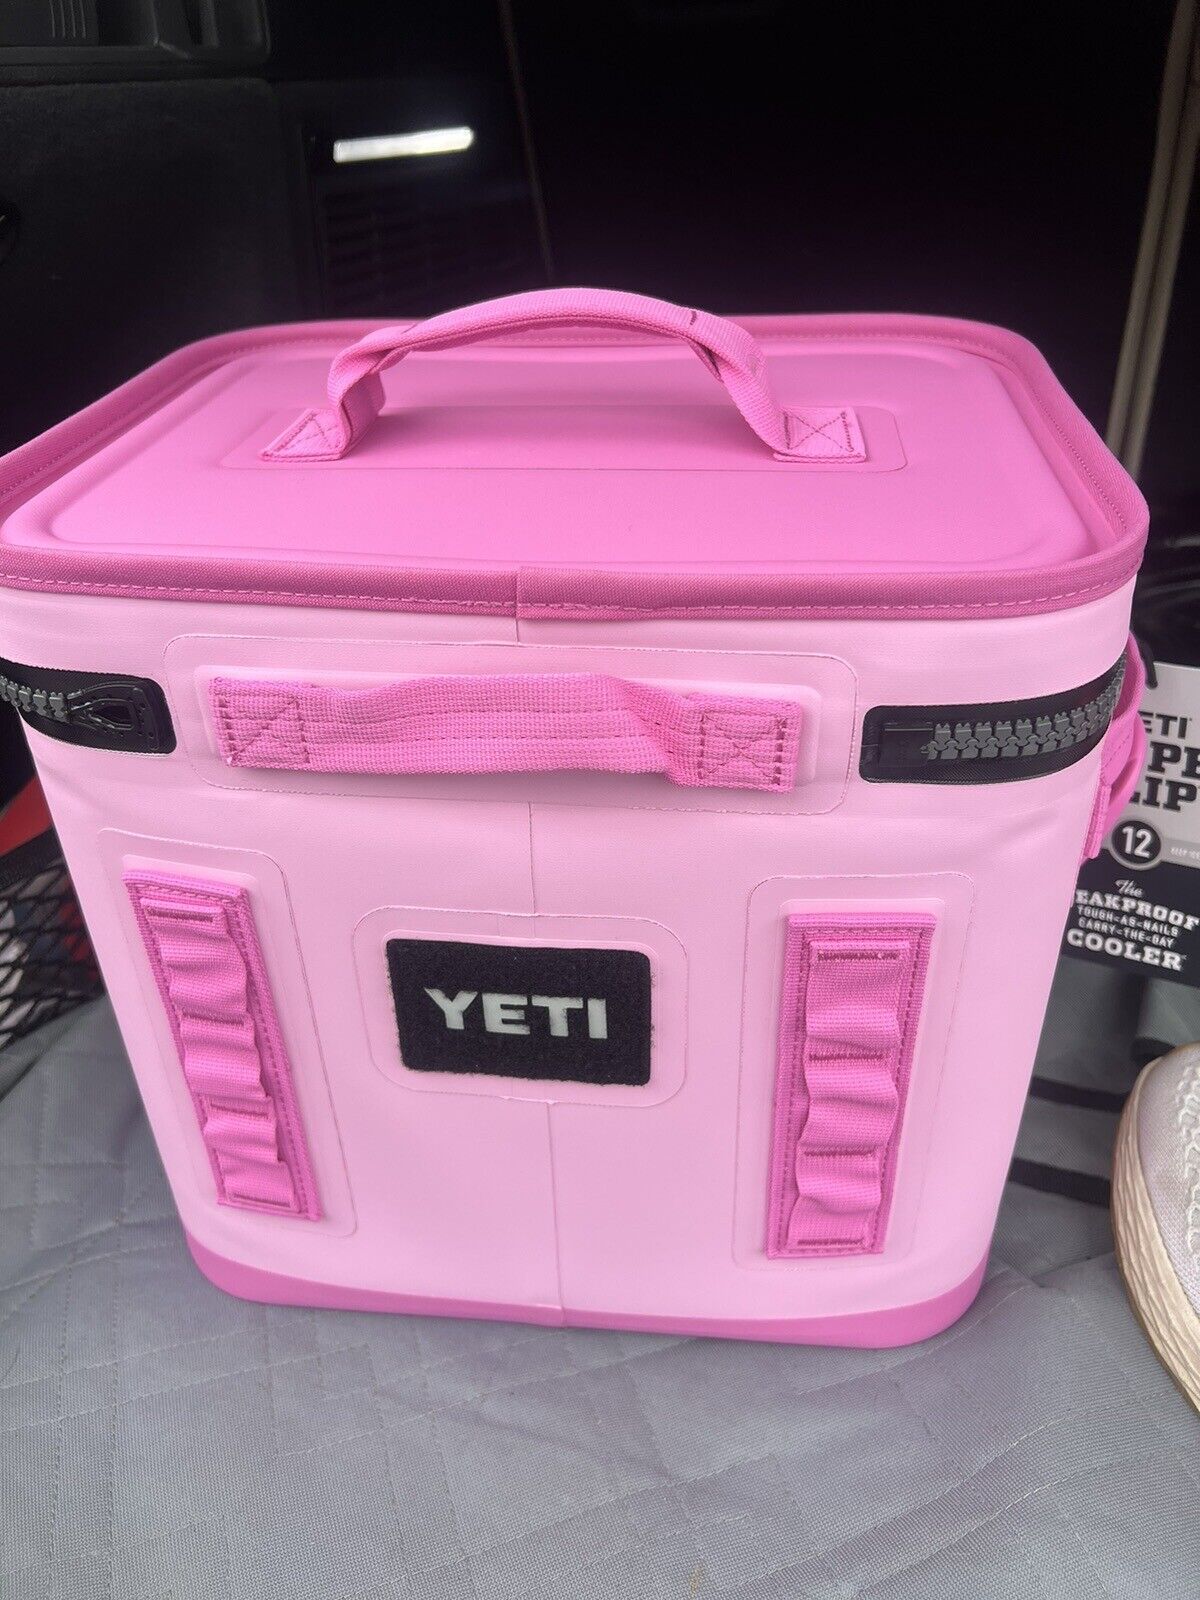 NEW LIMITED EDITION UNRELEASED Yeti hopper flip 12 soft cooler POWER PINK!!